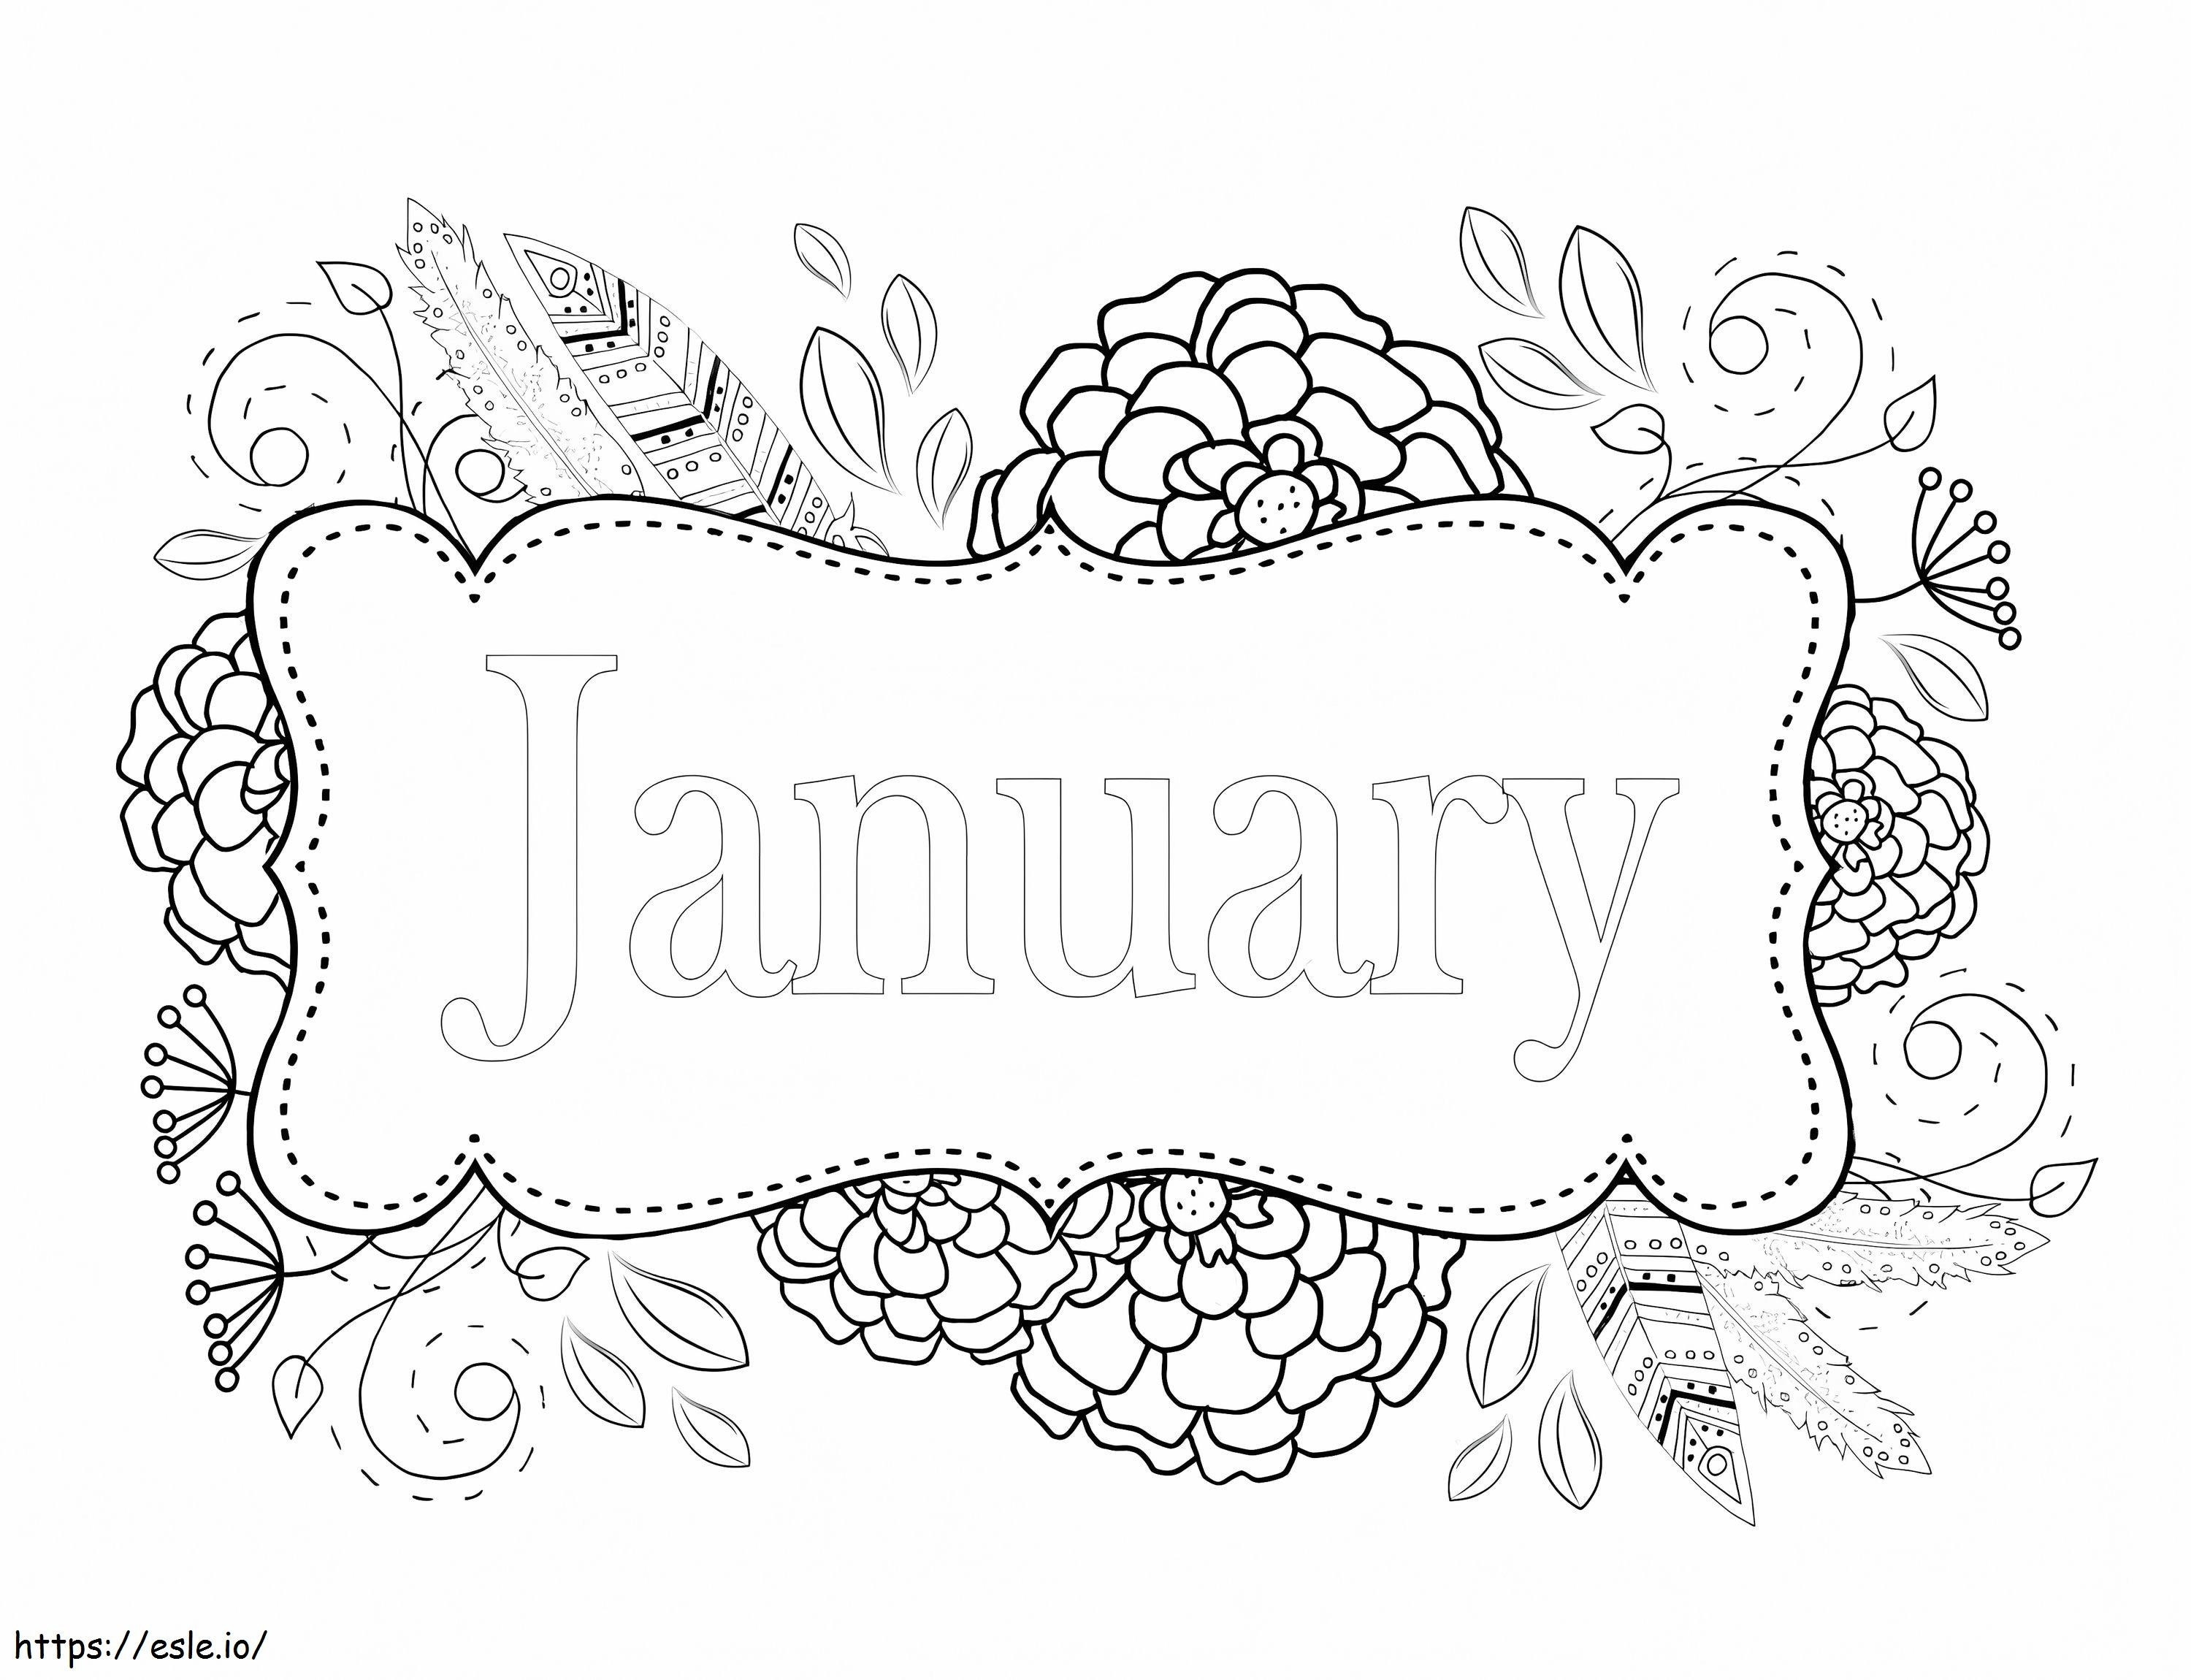 January Coloring Page 5 coloring page